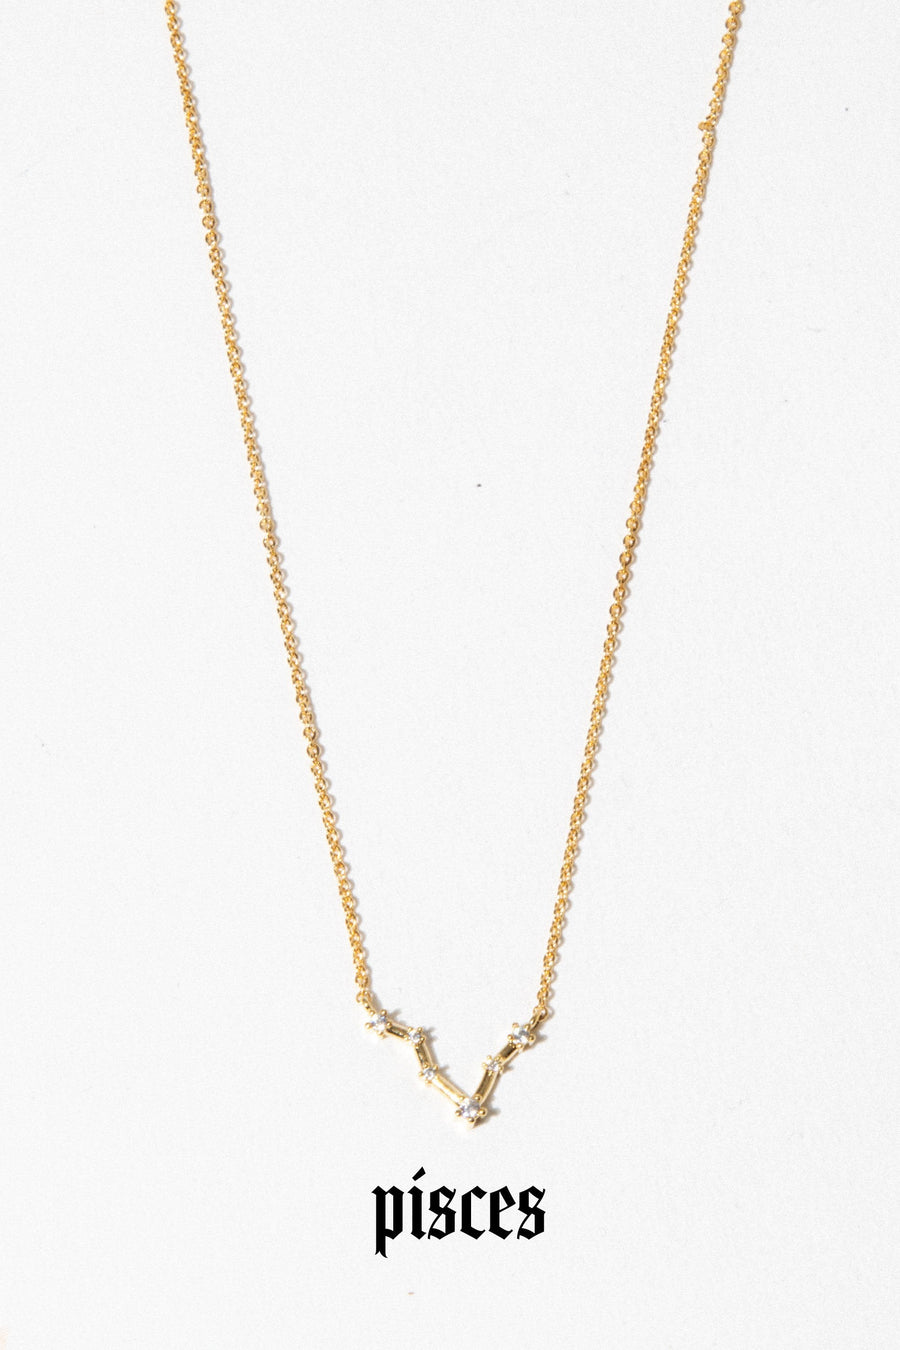 charis Jewelry Pisces / 16 Inches / Gold Constellation Necklace